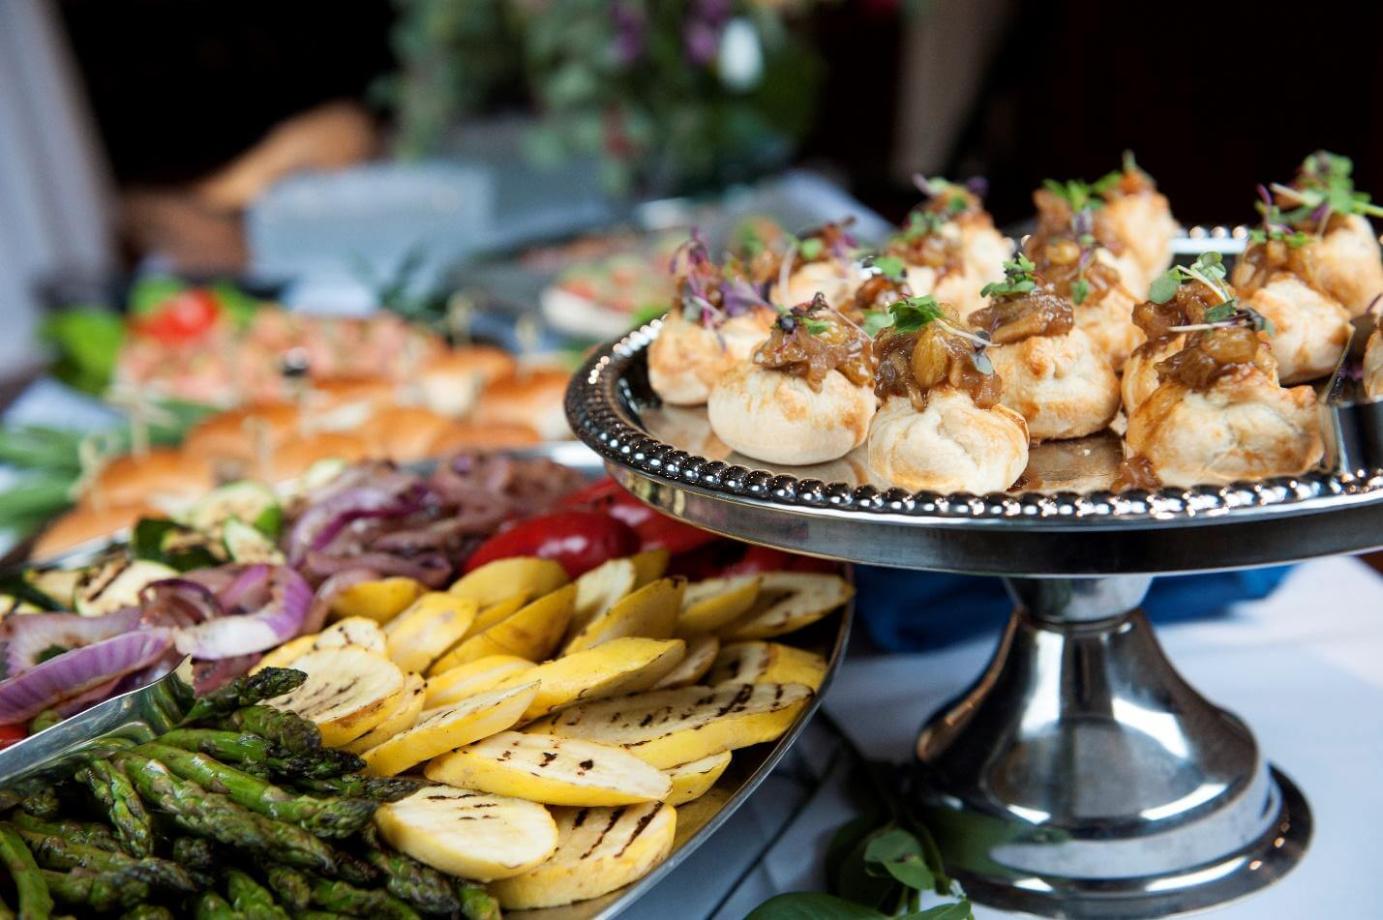 How to Evaluate the Quality and Service of Corporate Catering Companies?